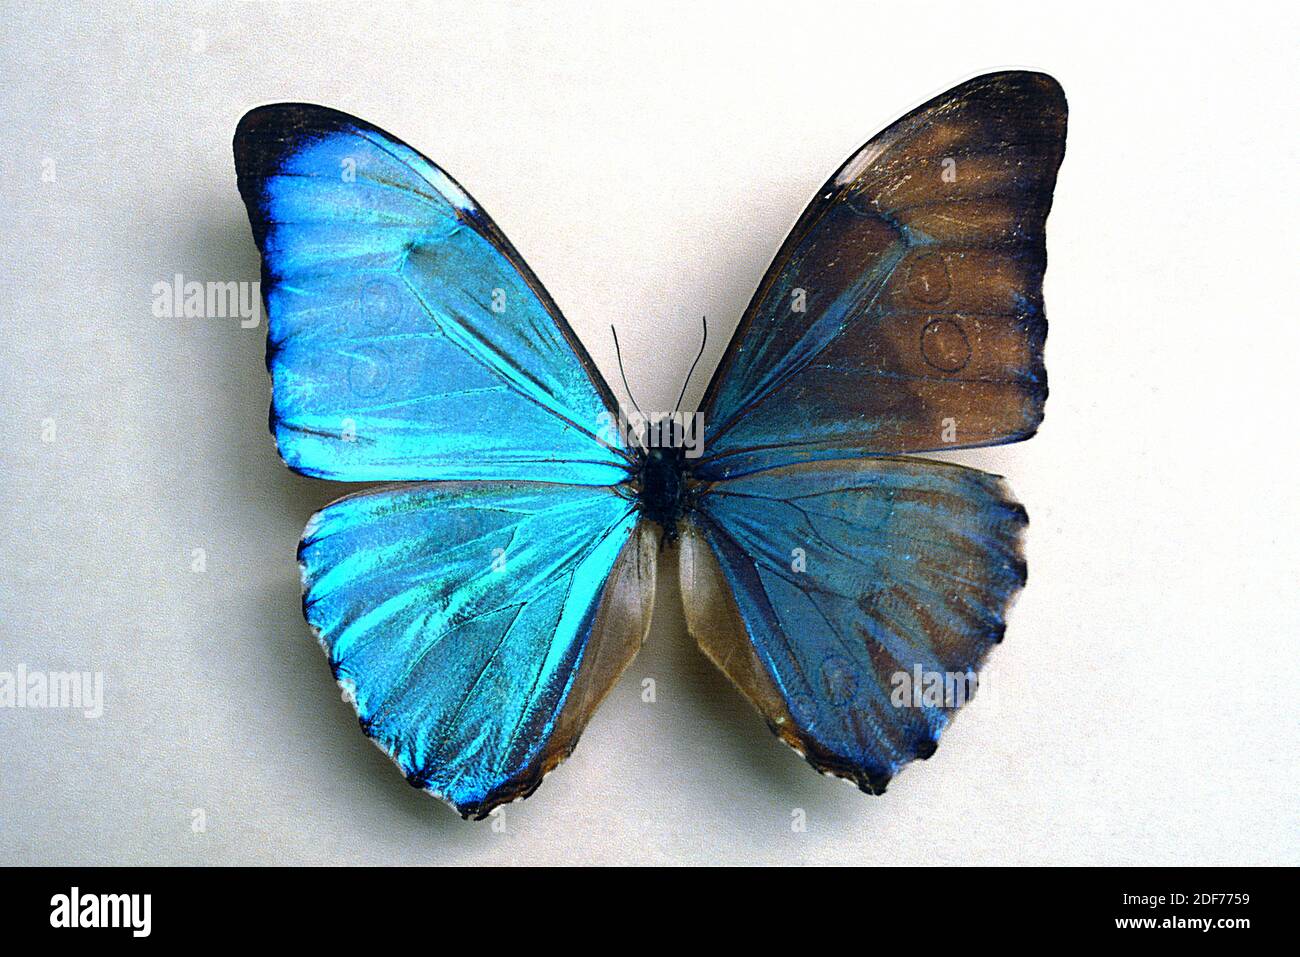 Aurora morpho (Morpho aurora) is a butterfly native to Bolivia and Peru. Adult, dorsal side. Stock Photo